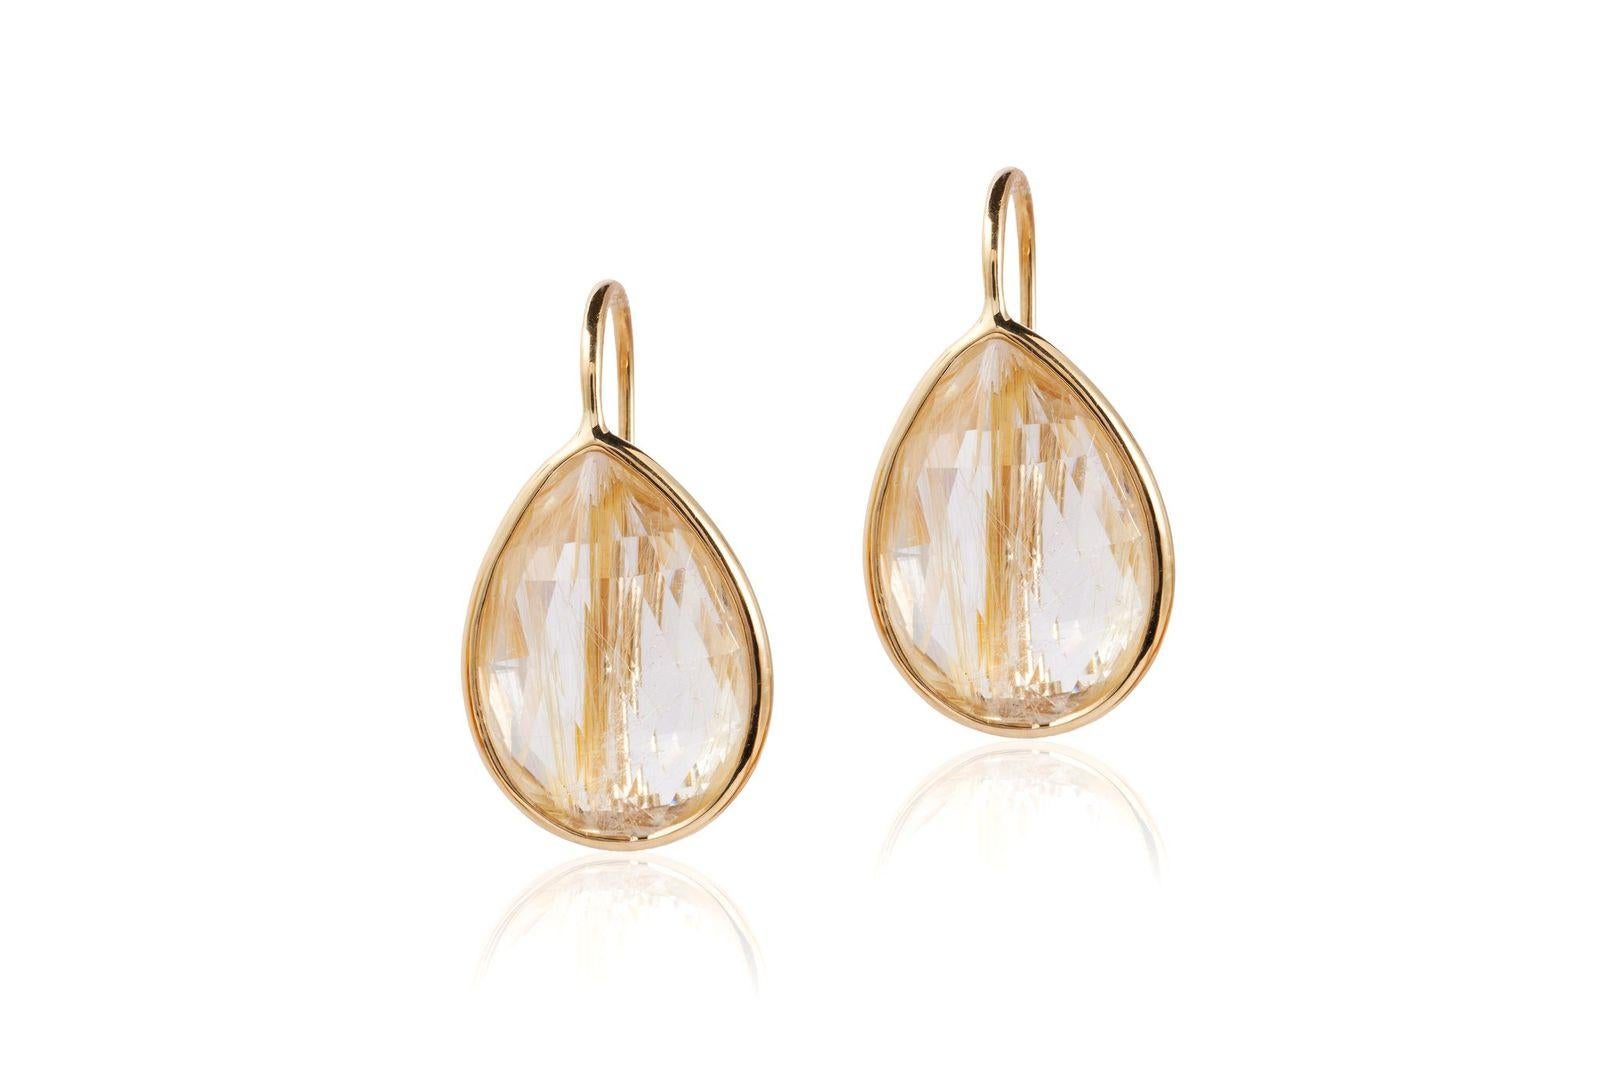 Rutilated Pear Shape Briolette Earrings on Wire in 18K Yellow Gold, from 'Gossip' Collection

Stone Size: 10 x 14 mm 

Gemstone Approx Wt: Rutilated - 10.64 Carats